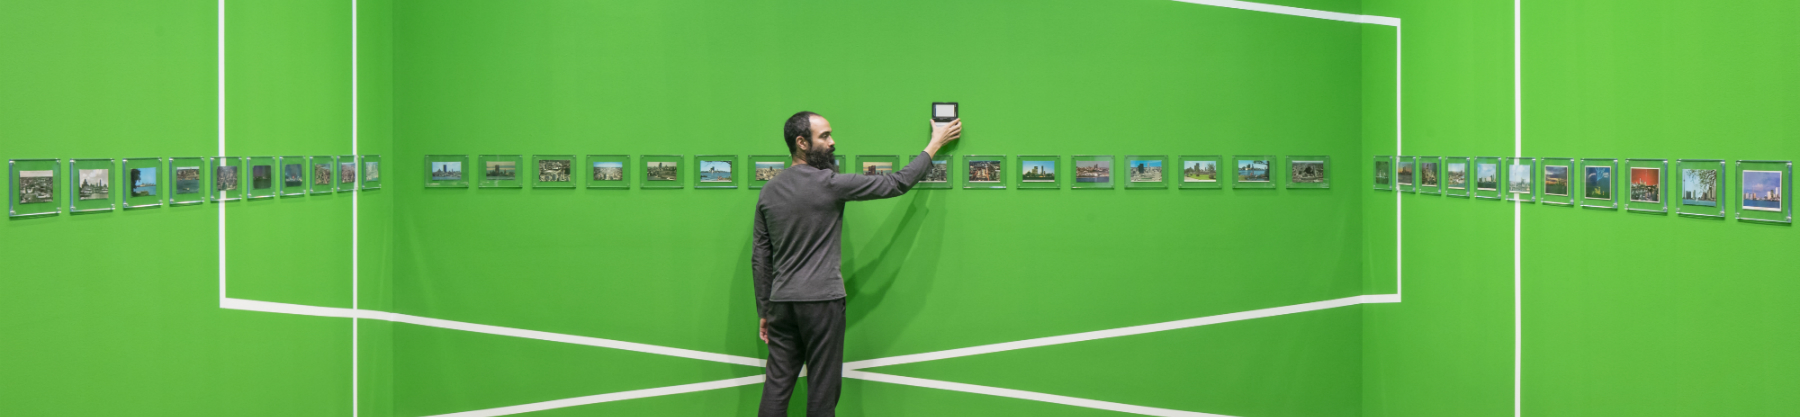 A man stands in the middle of a gallery of photographs. The walls are bright green and the photos are hung in a horizontal line around the room.